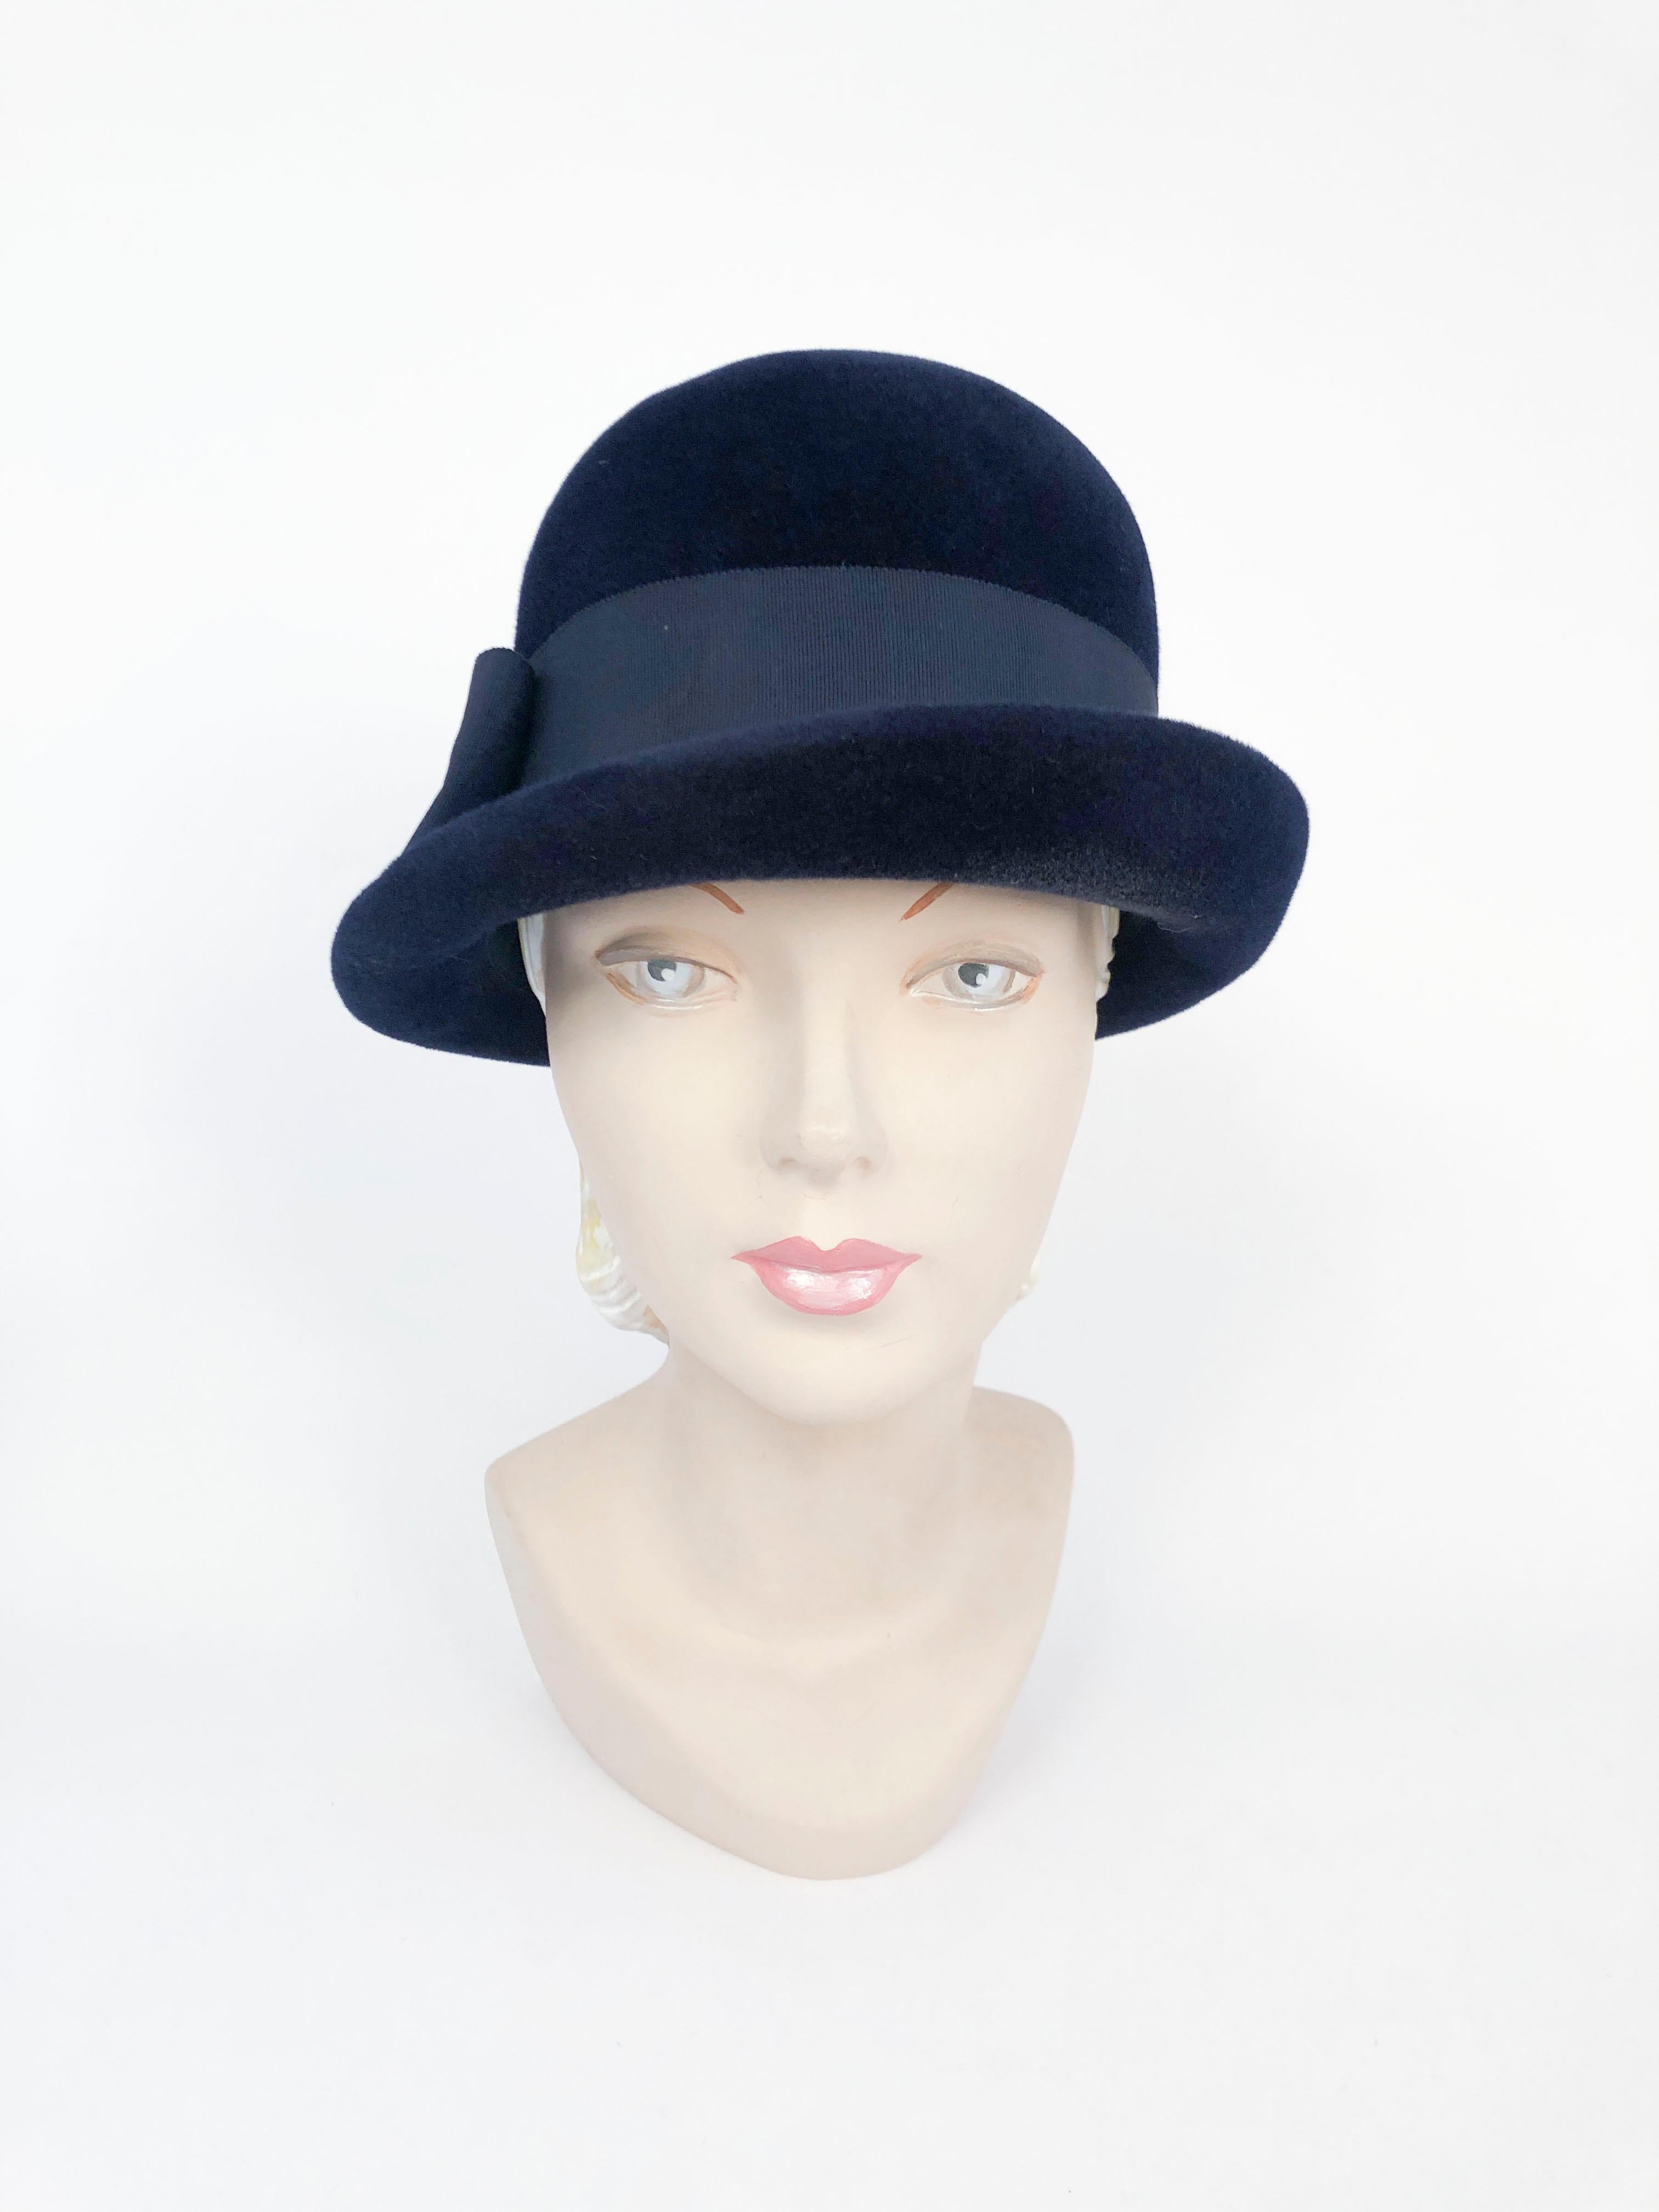 1960s Navy Fur Felt Cloche with Wide Band and Bow finished with a single brass button.